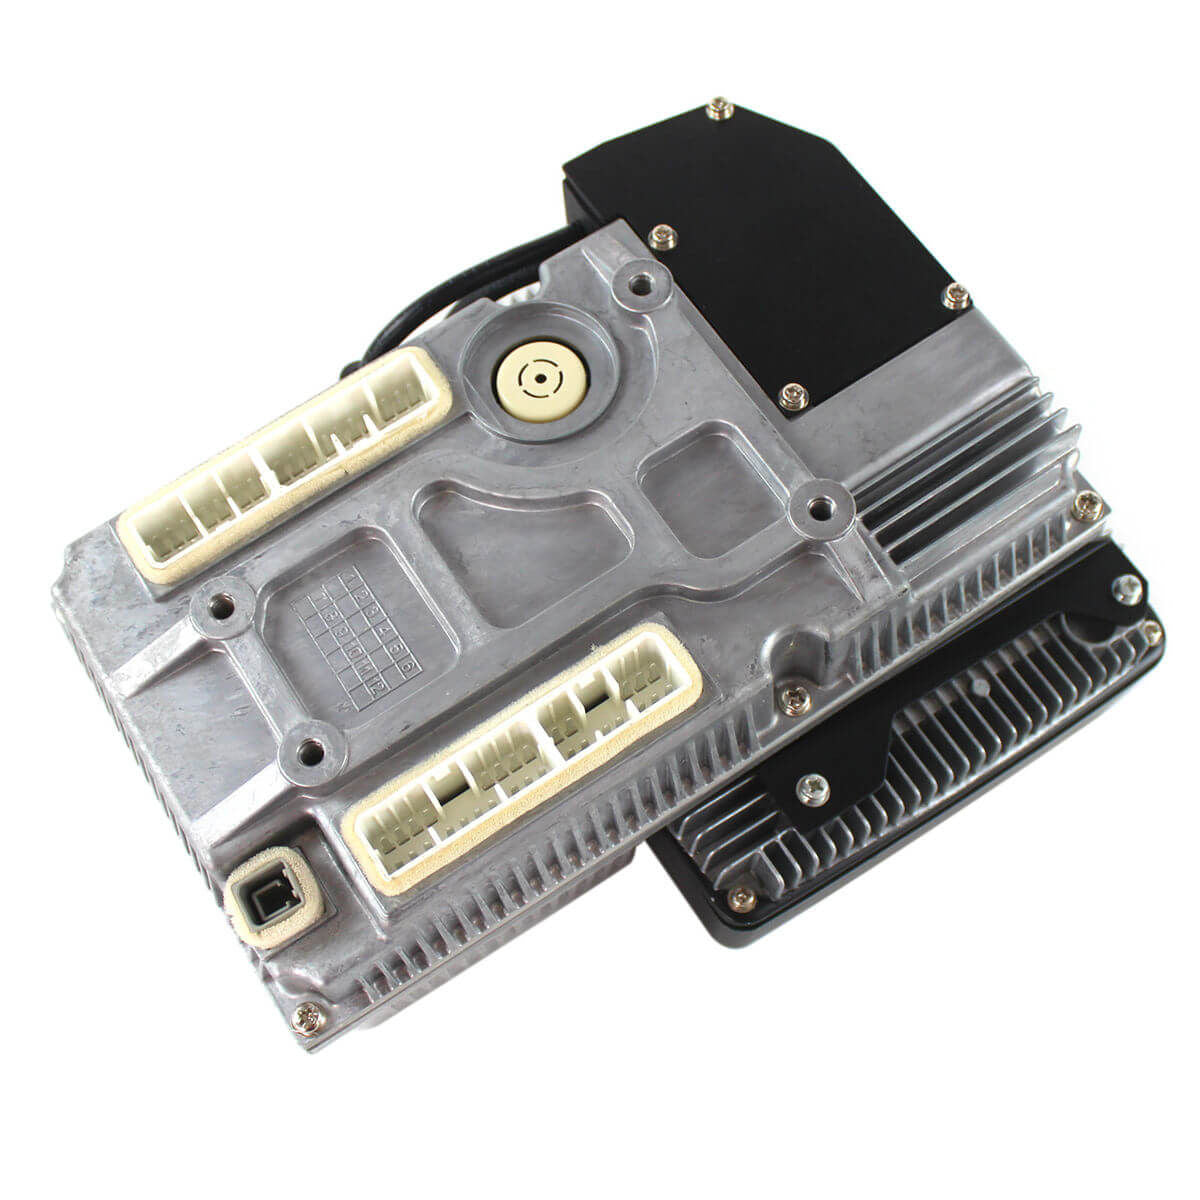 7835-31-1206 7835-31-1207 7835-31-1208 Monitor for PC200-8 PC220-8 PC270-8 - Sinocmp